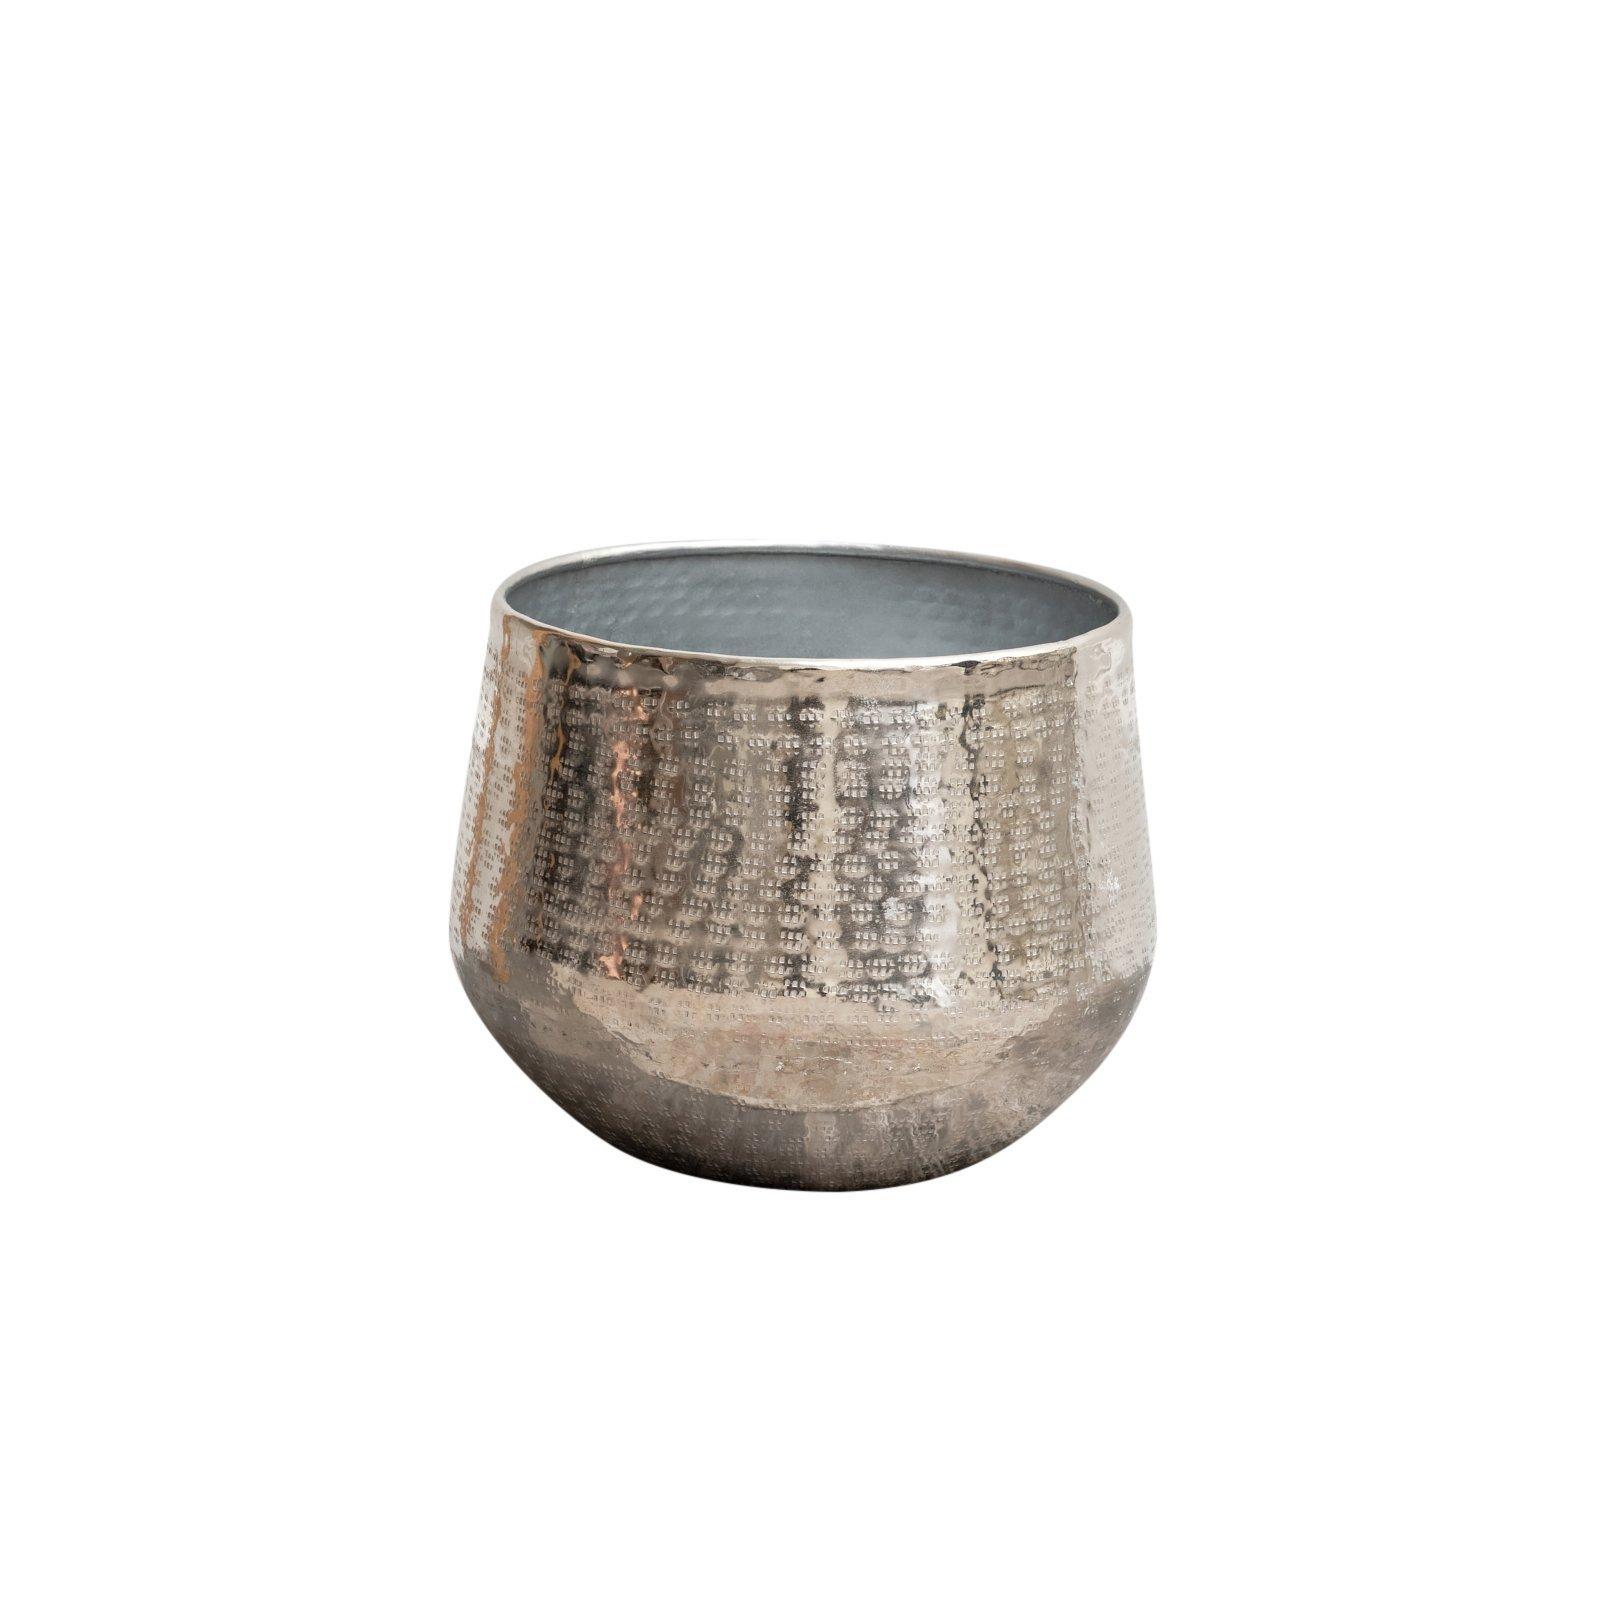 Large Round Silver Patterned Planter